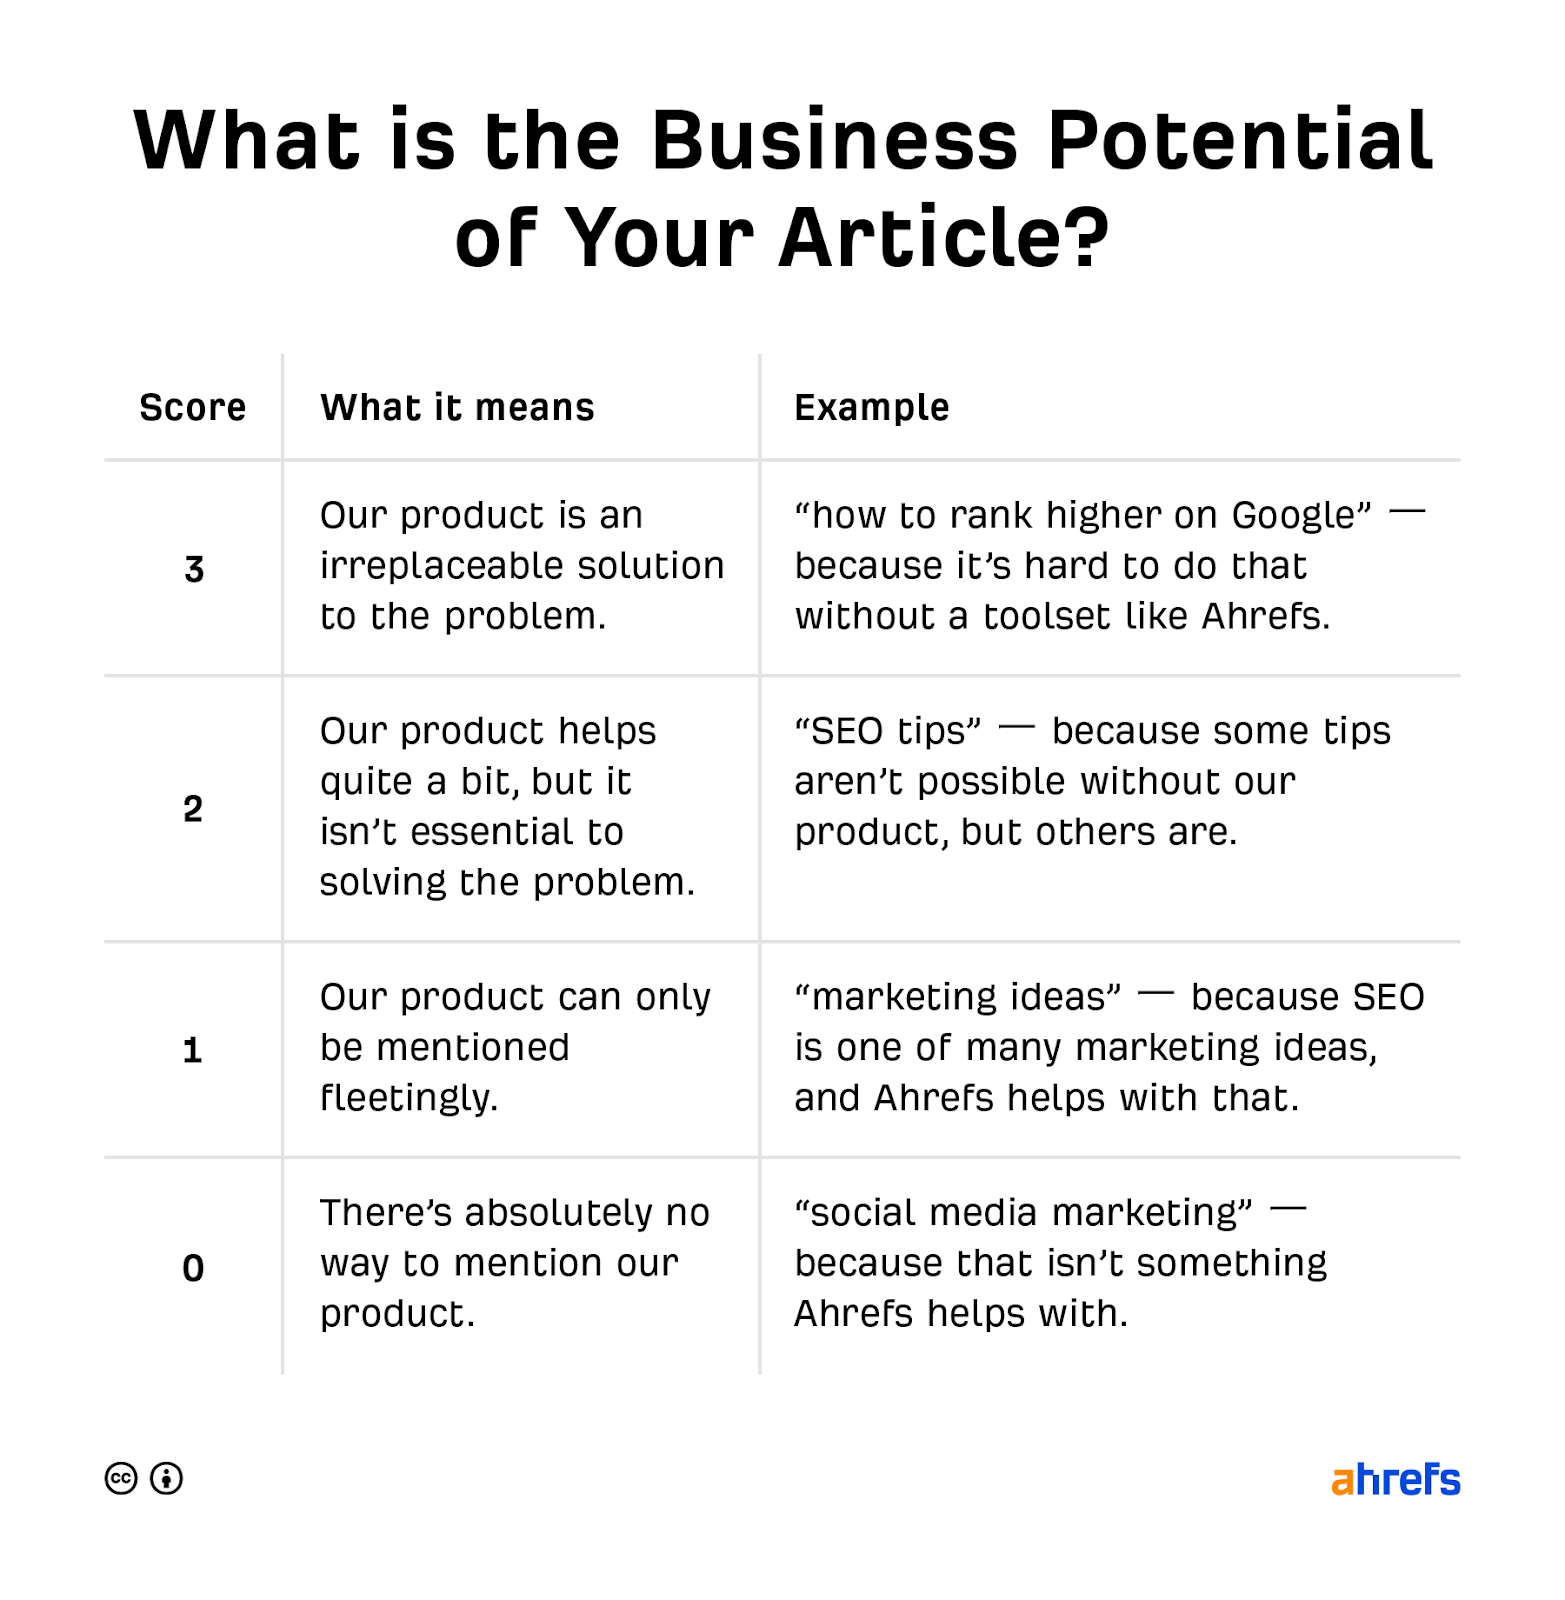 Business potential scoring